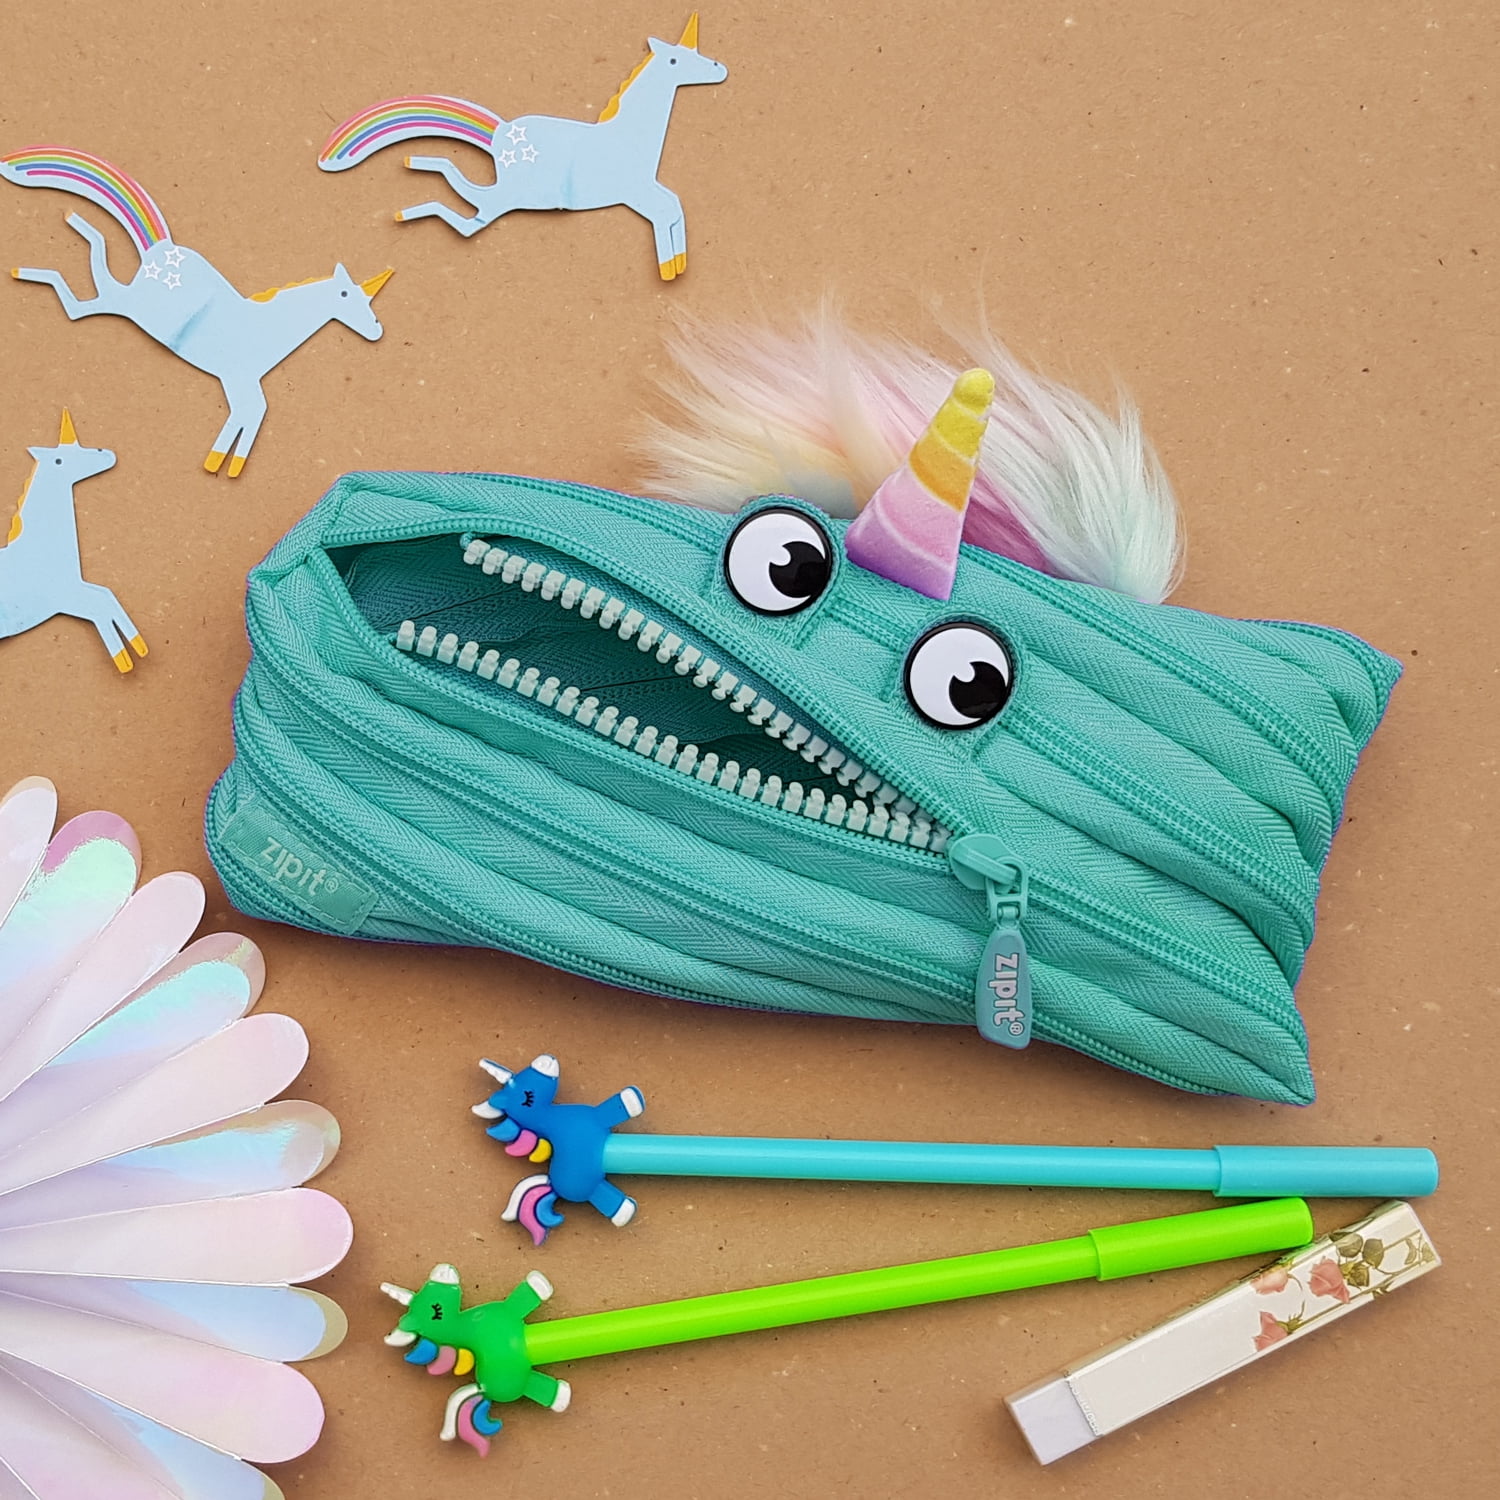 Pery Vivid & Handy Pencil Case And Pen Holder For Girls and Boys With  Smooth Zipper System For Carrying Useful Stationery Item, Best For Birthday  Gift - Unicorn 